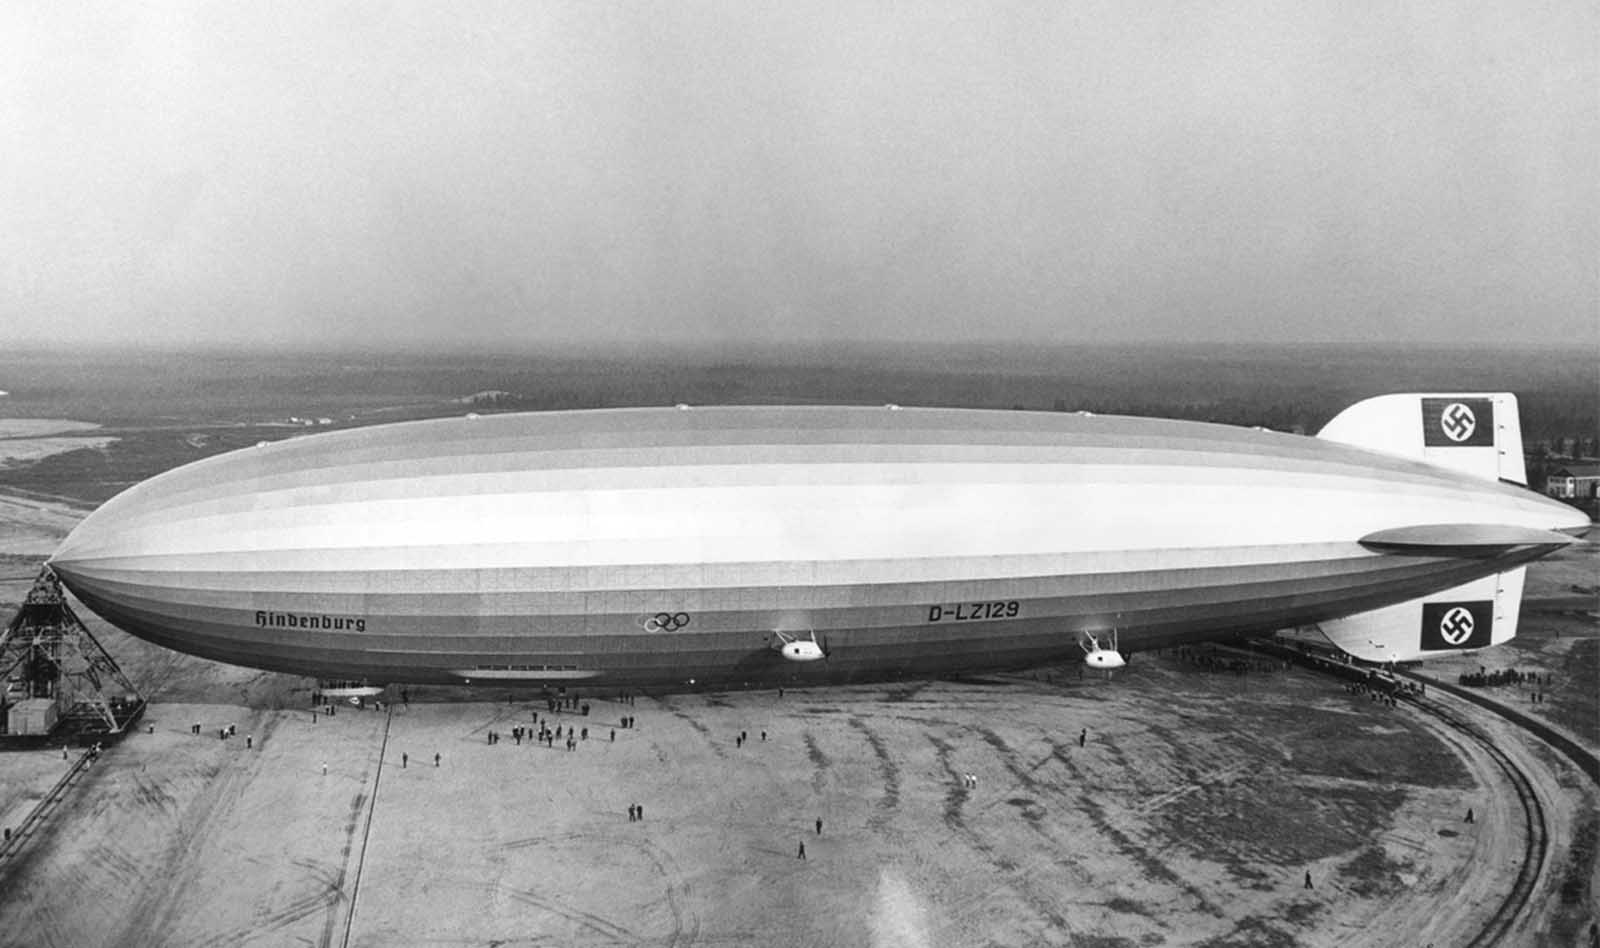 The giant German zeppelin Hindenburg, in Lakehurst, New Jersey, in May of 1936. The Olympic rings on the side were promoting the 1936 Berlin Summer Olympics.